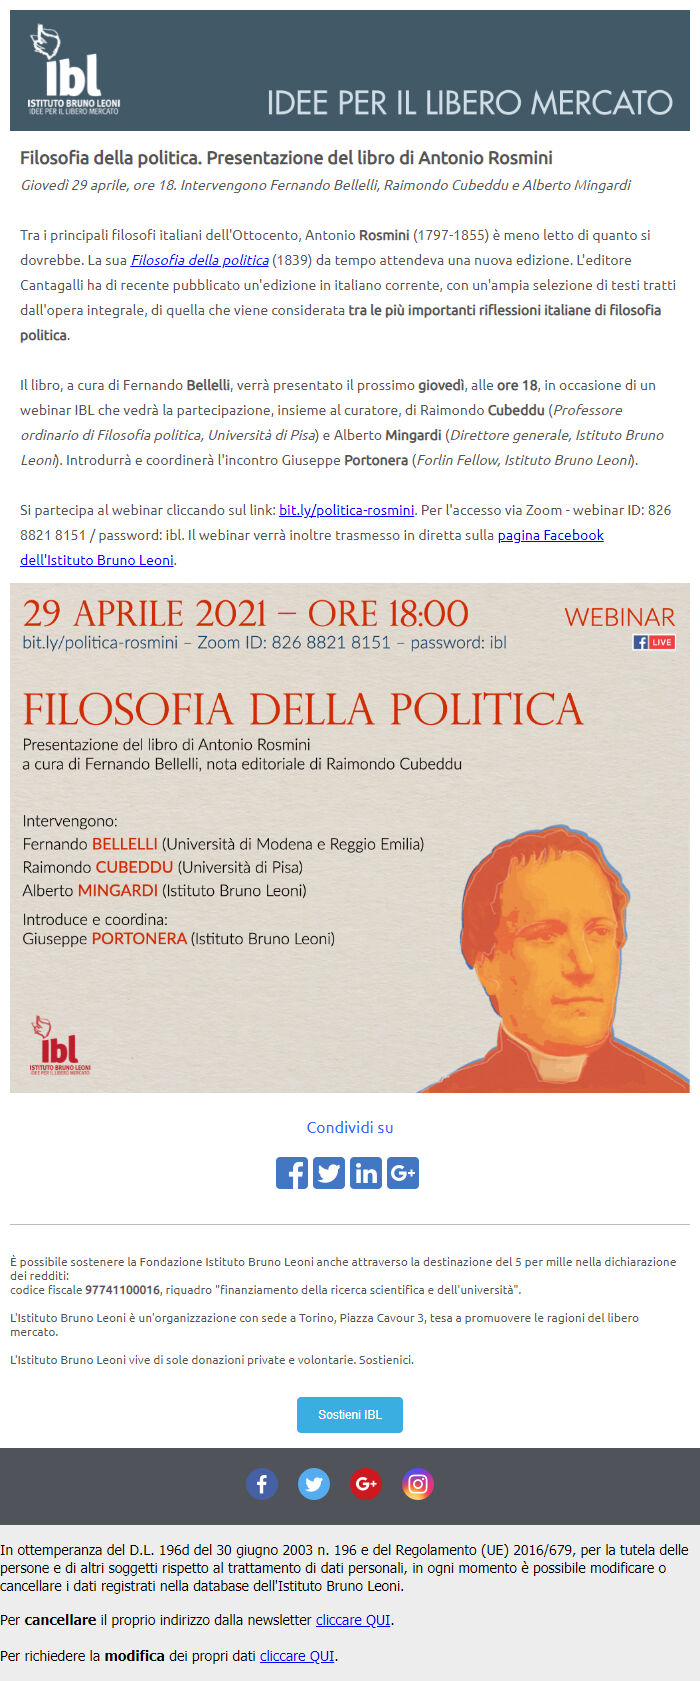 Email with an invitation to a webinar by Bruno Leoni Institute